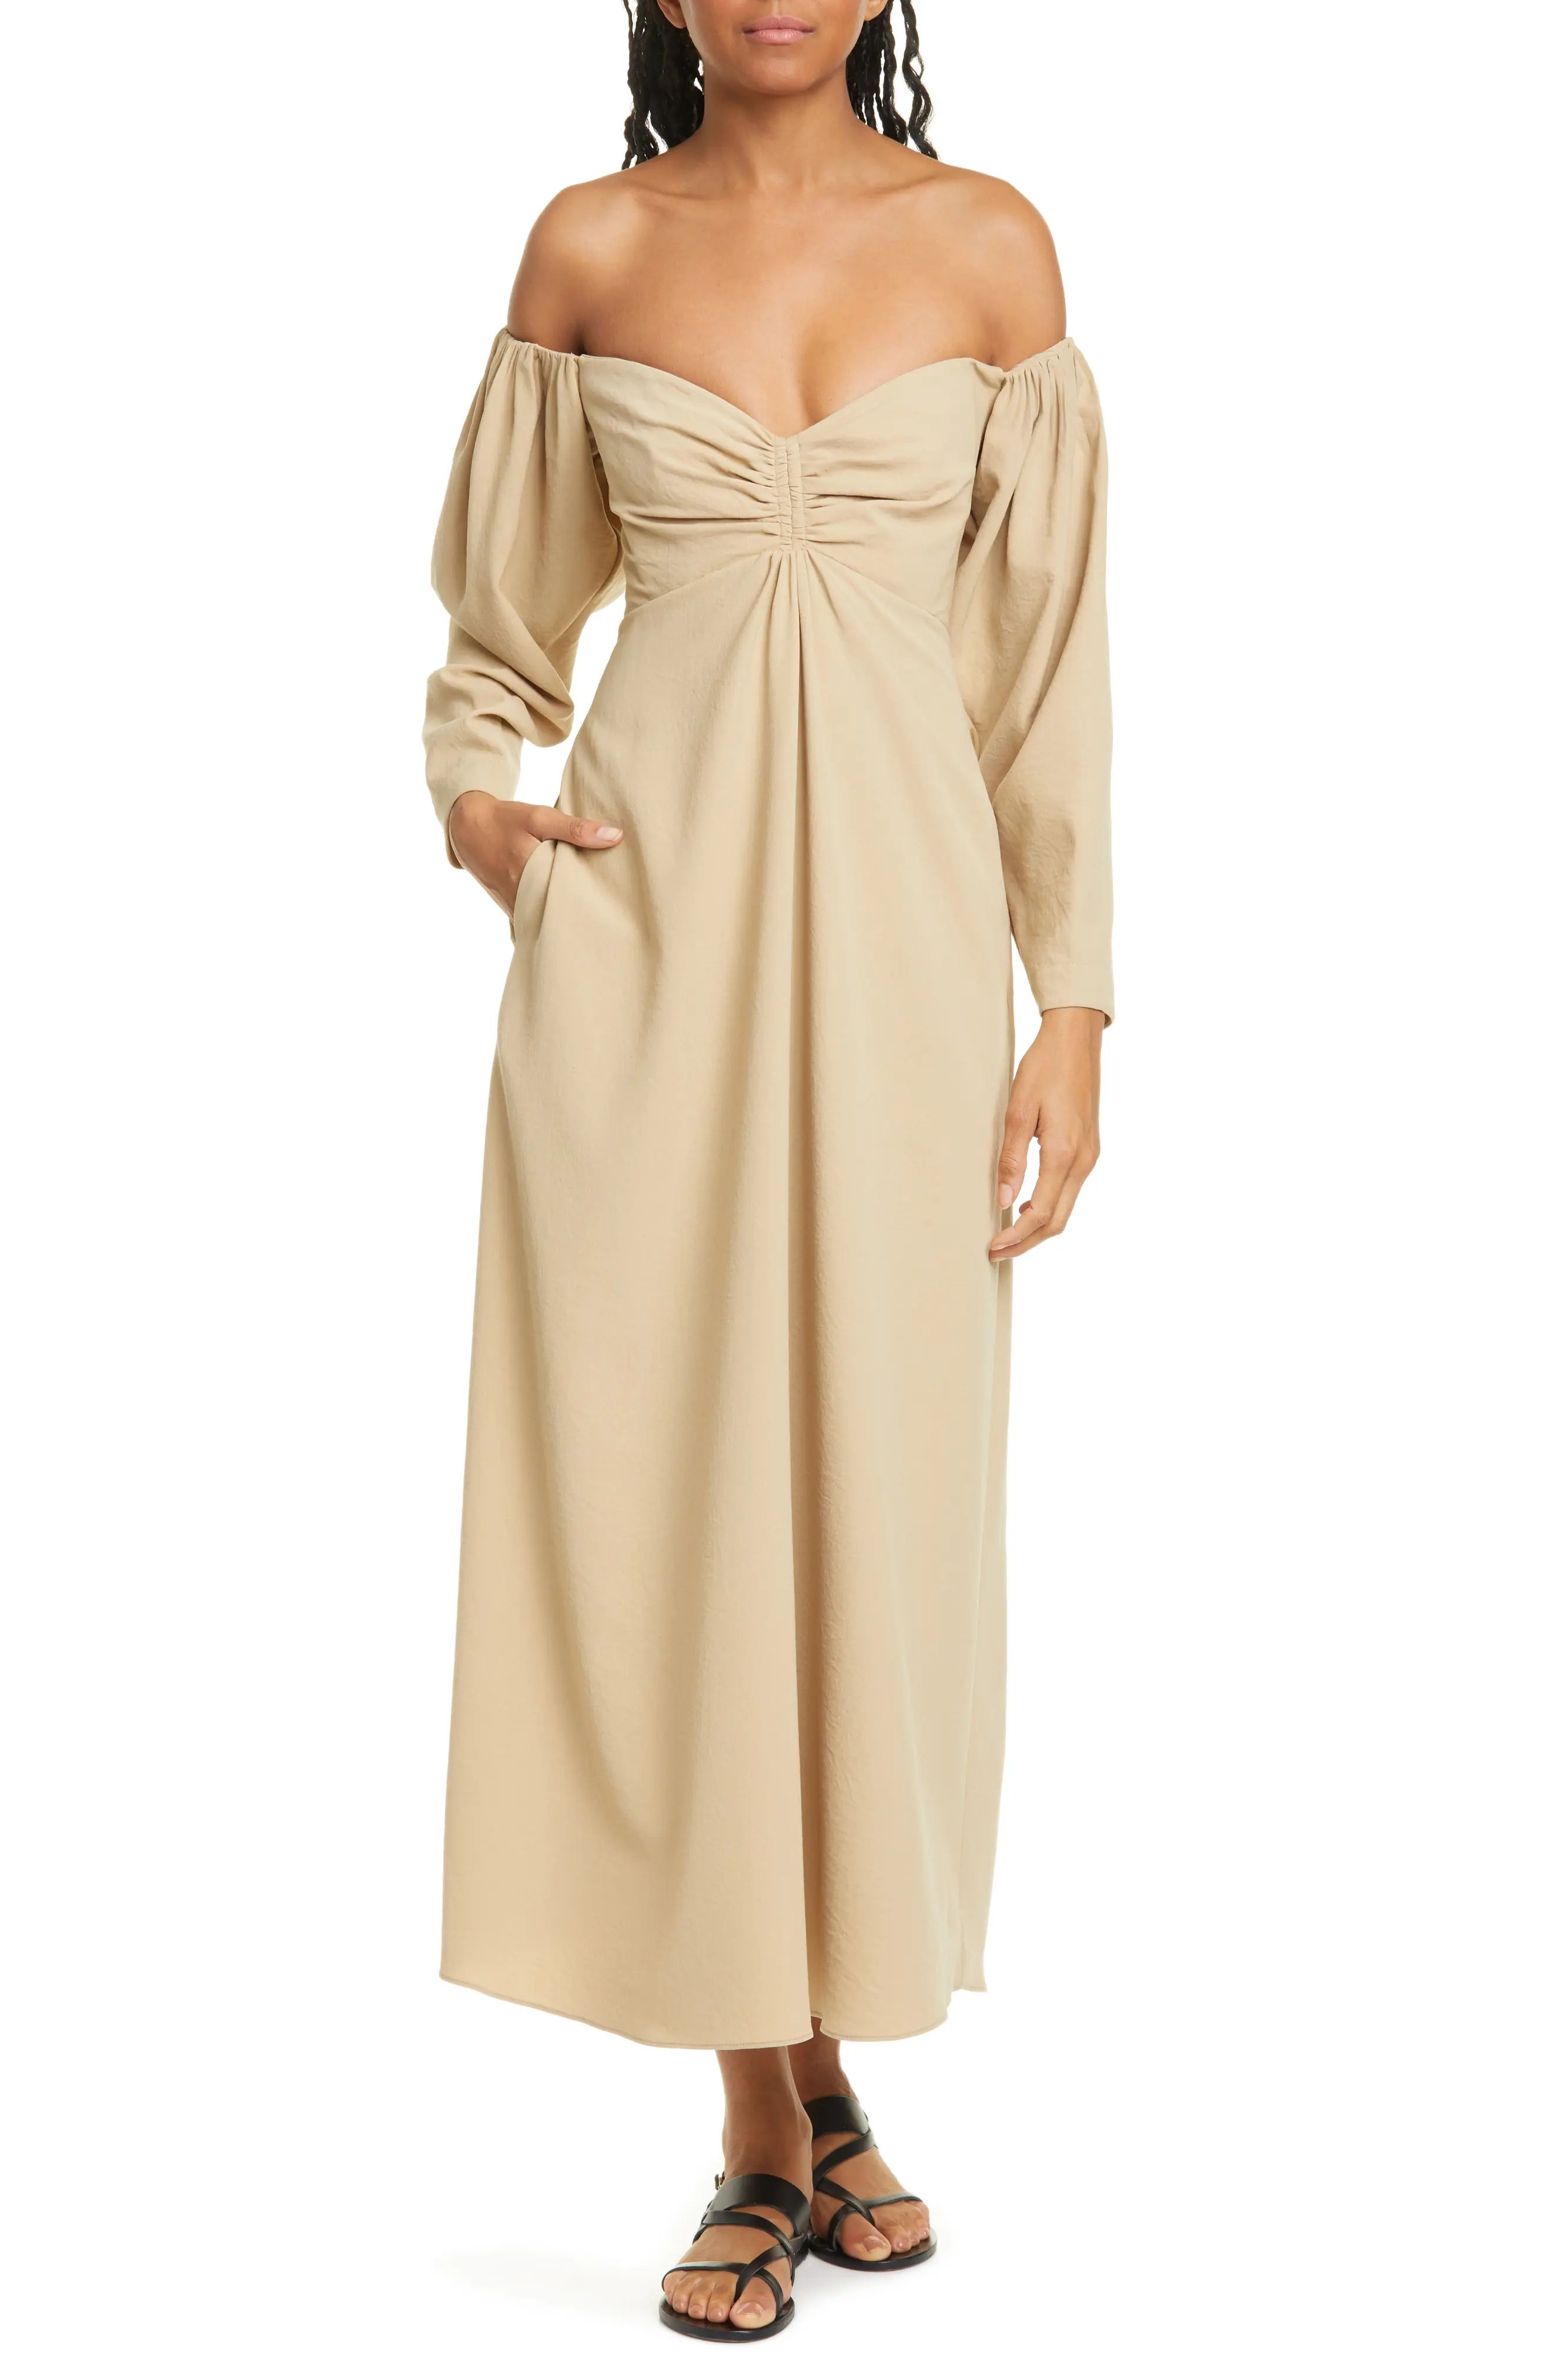 Women's A.l.c. Calley Long Sleeve Off The Shoulder Maxi Dress, Size 6 - Beige | Nordstrom